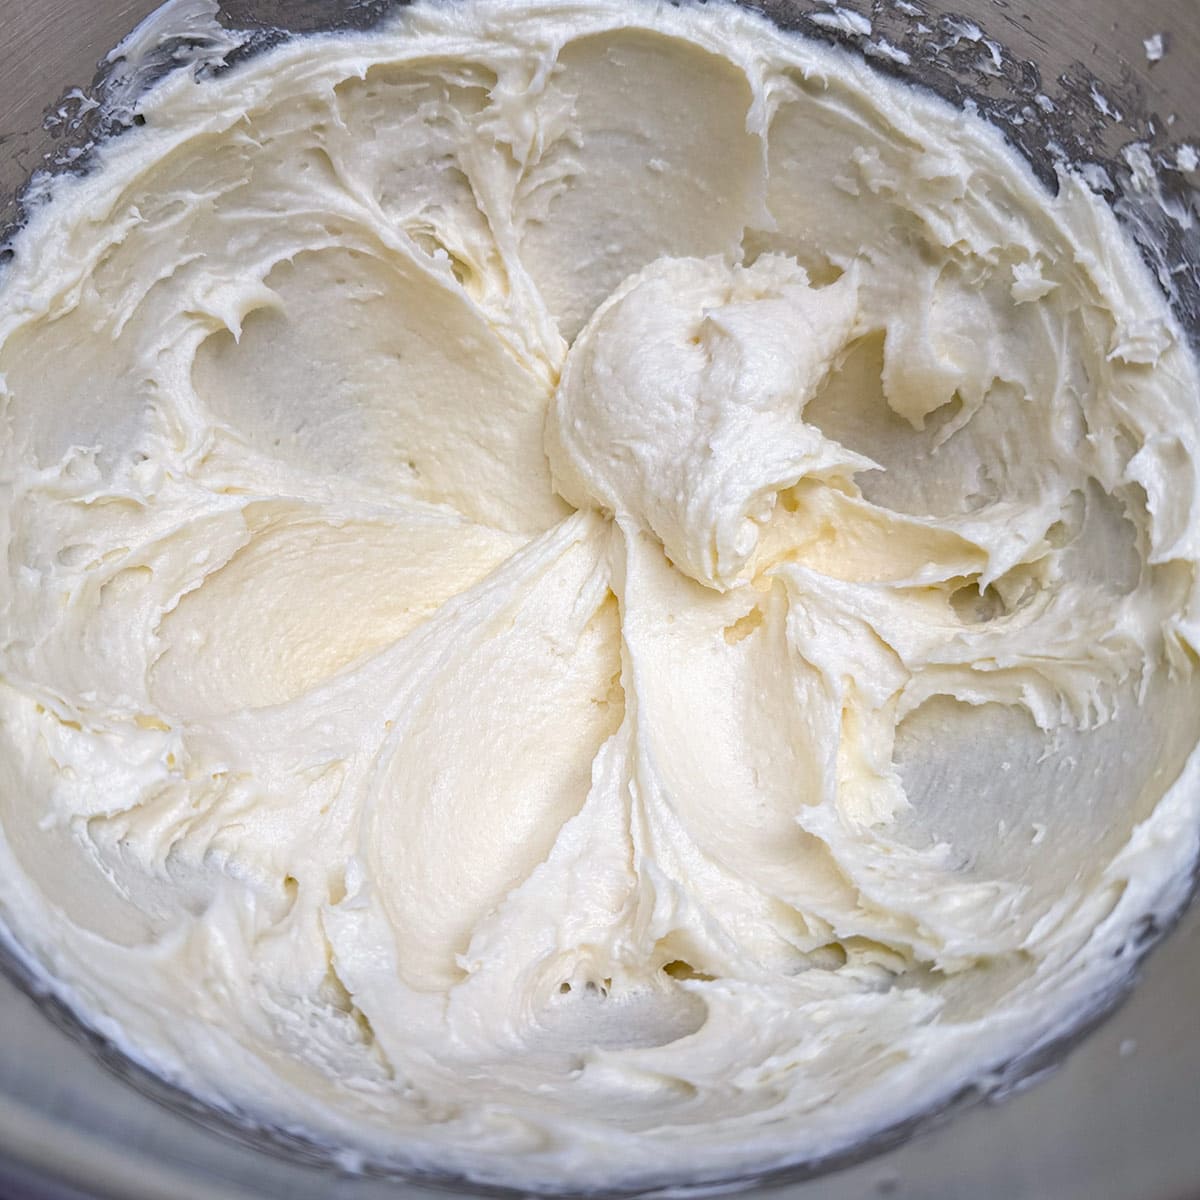 How creamy looking after the sugar is added to the butter and cream cheese.